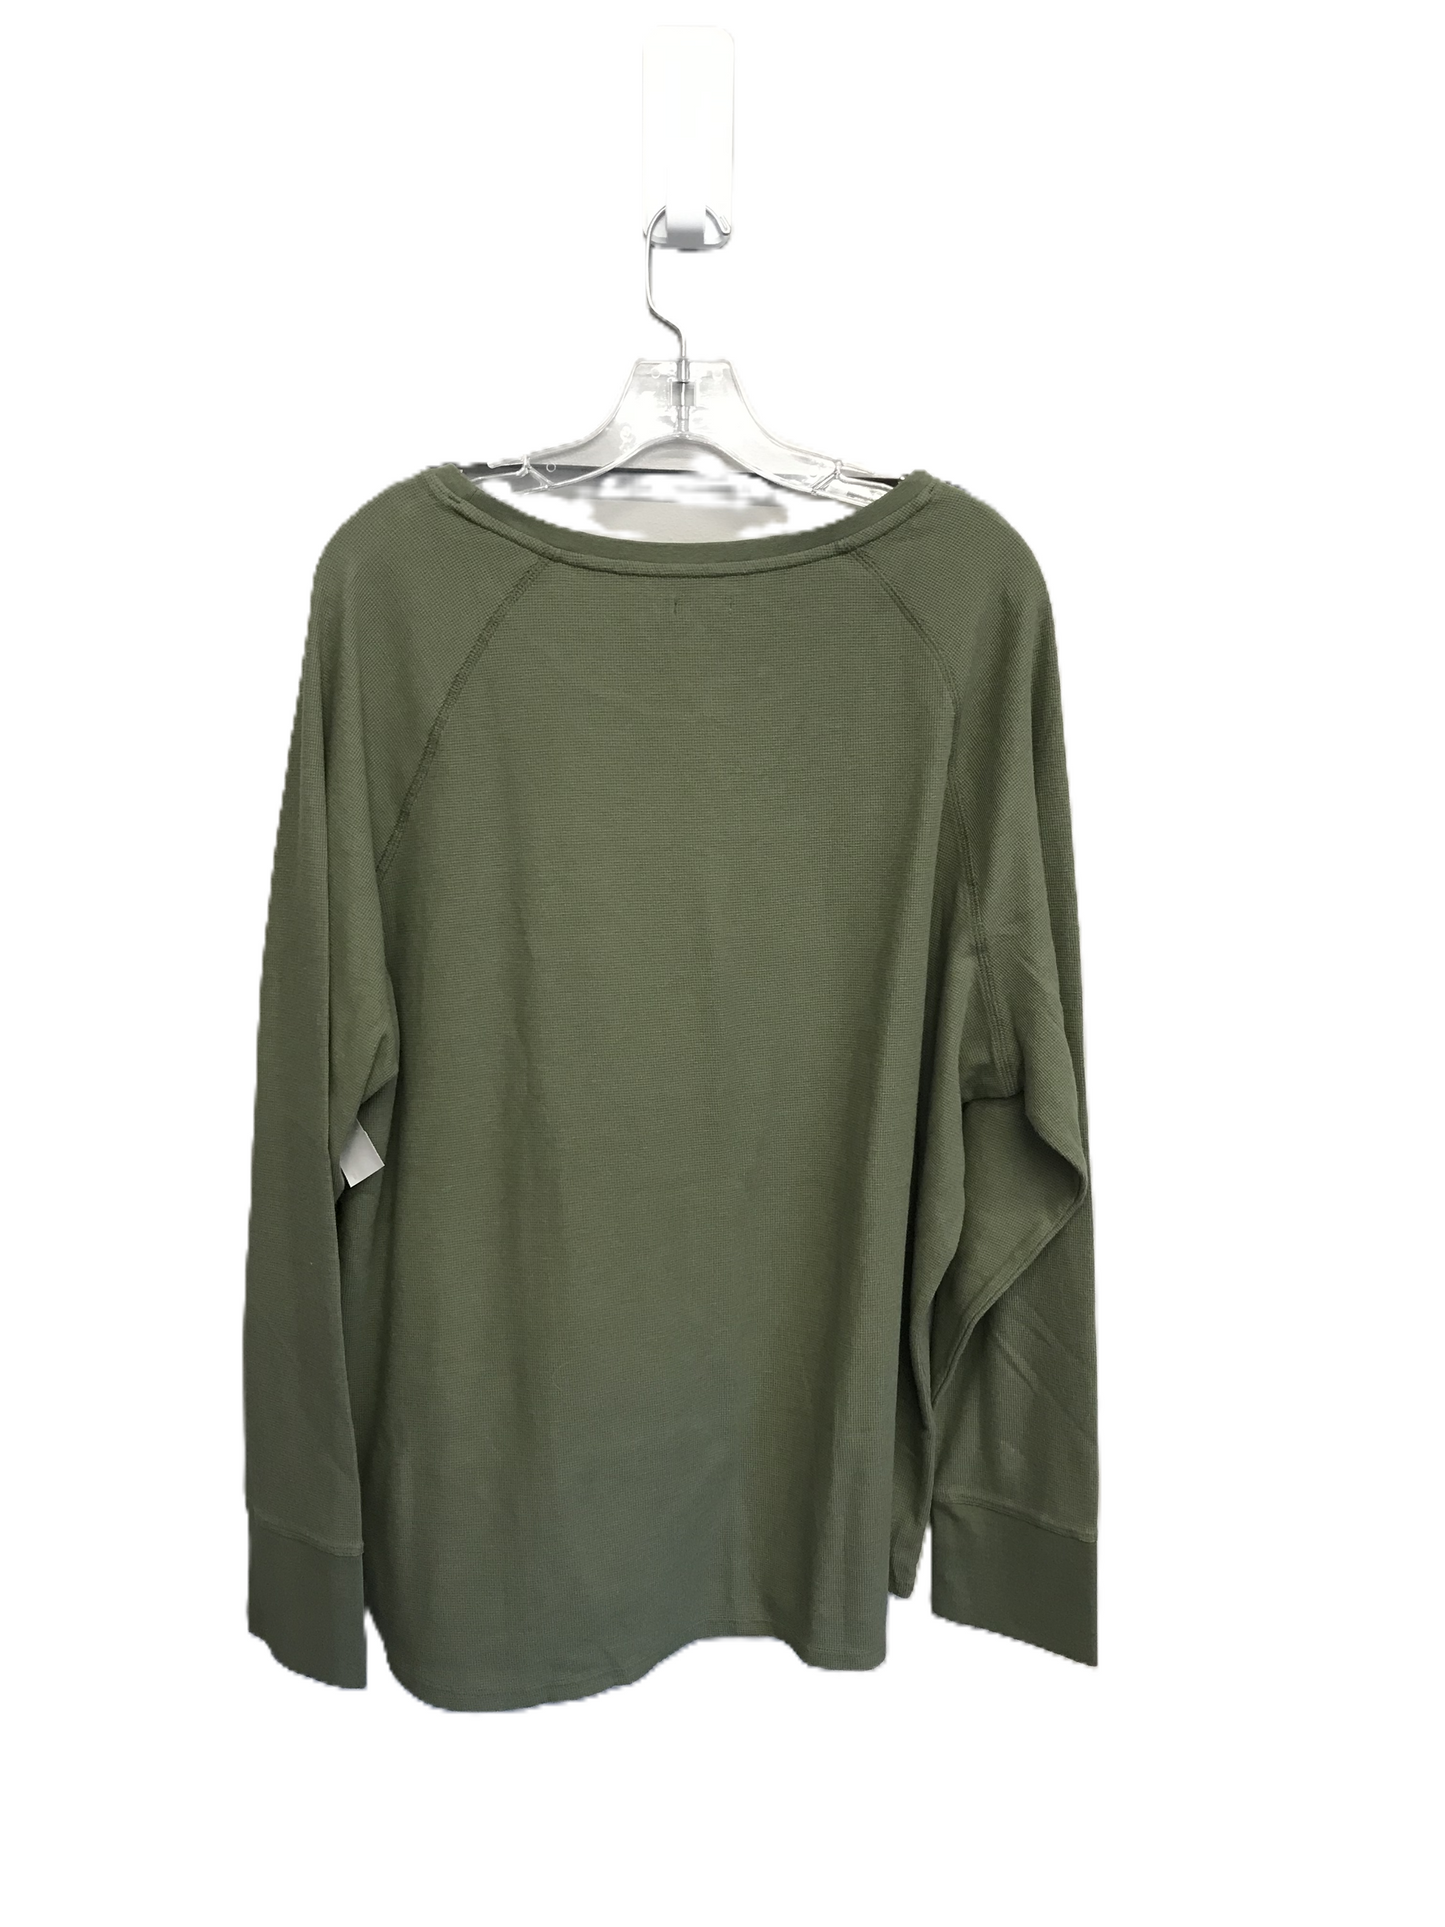 Green Top Long Sleeve By L.l. Bean, Size: 3x